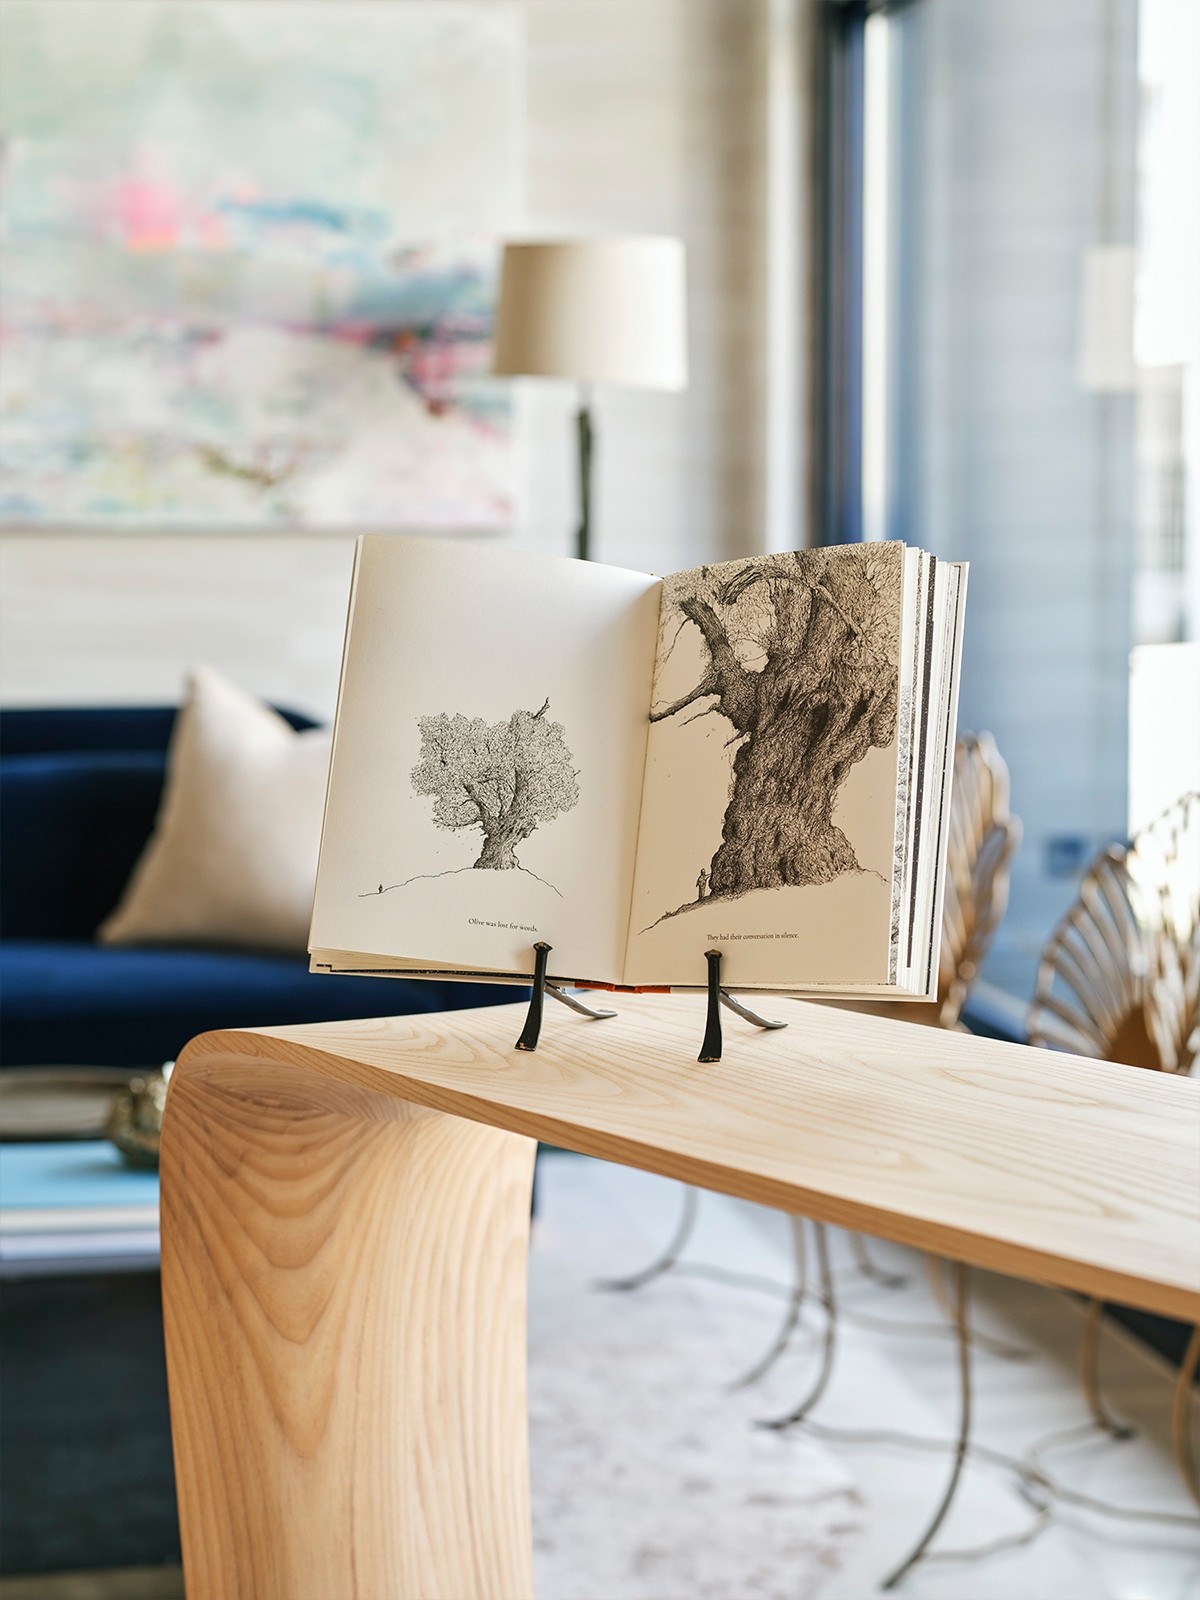 How to Choose Artwork for Your Home